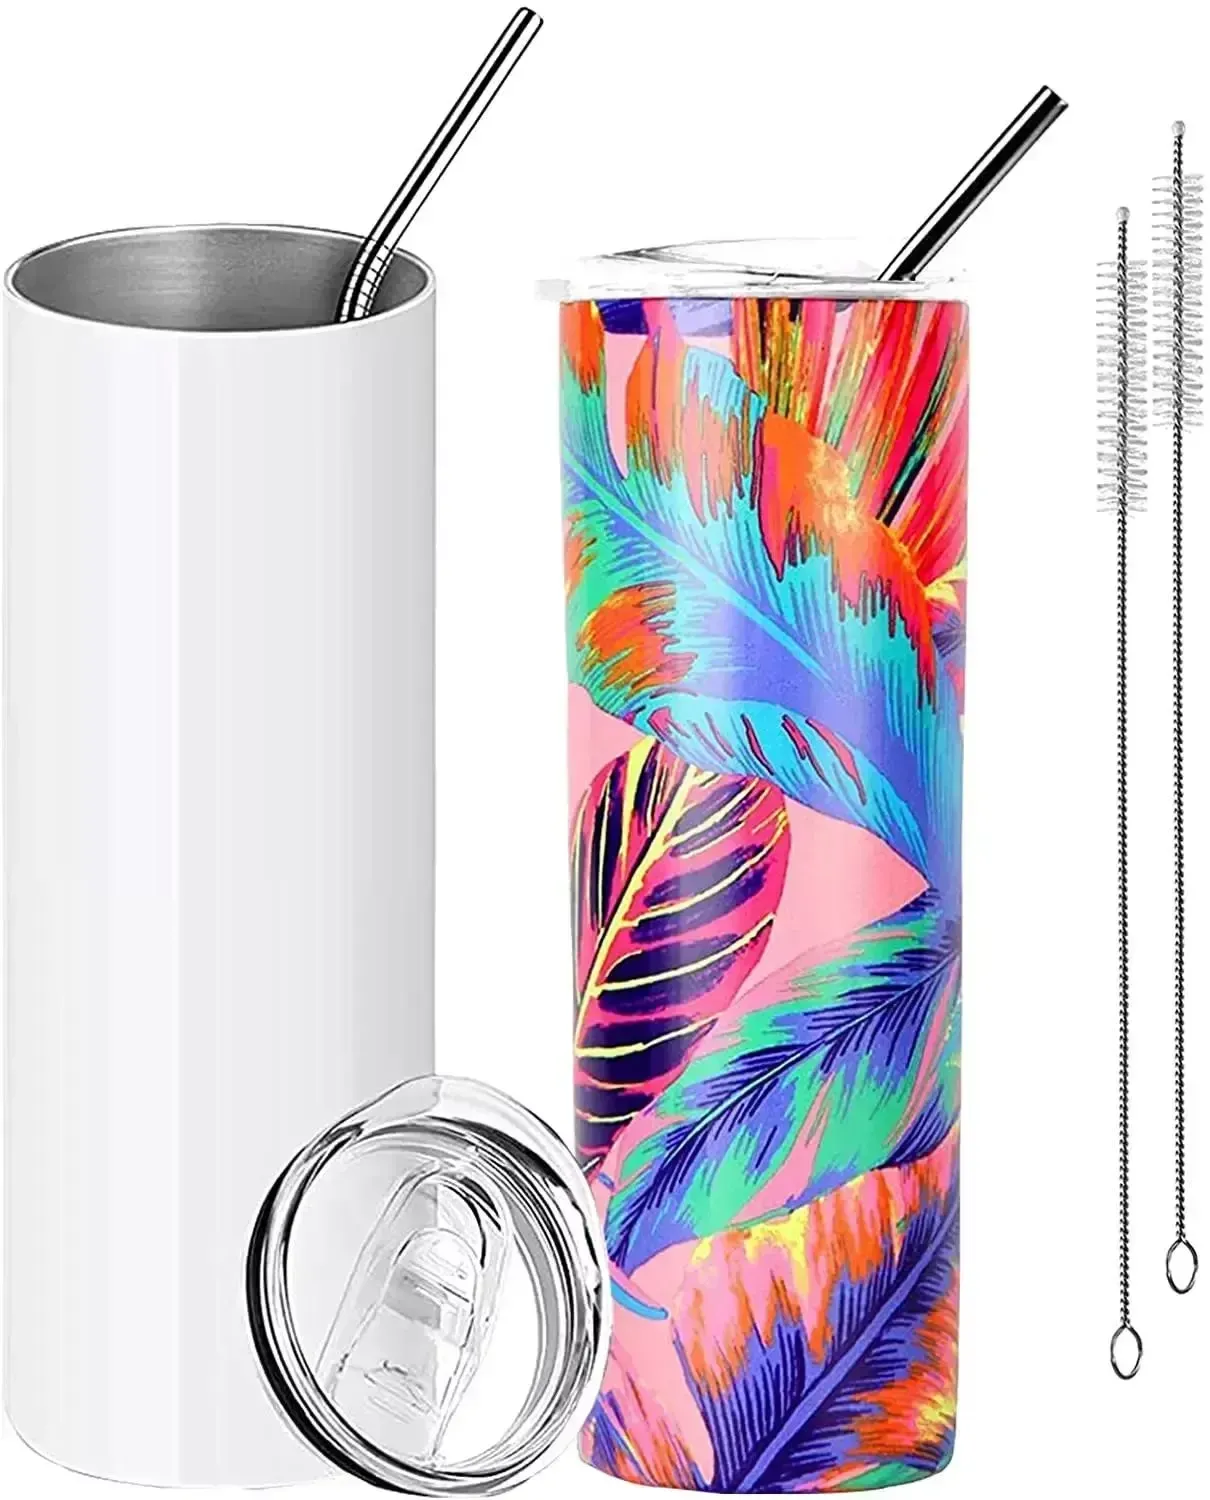 USA Warehouse 20 oz Sublimation Blank Straight Straight Stainless Steel  Tumbler With Straw